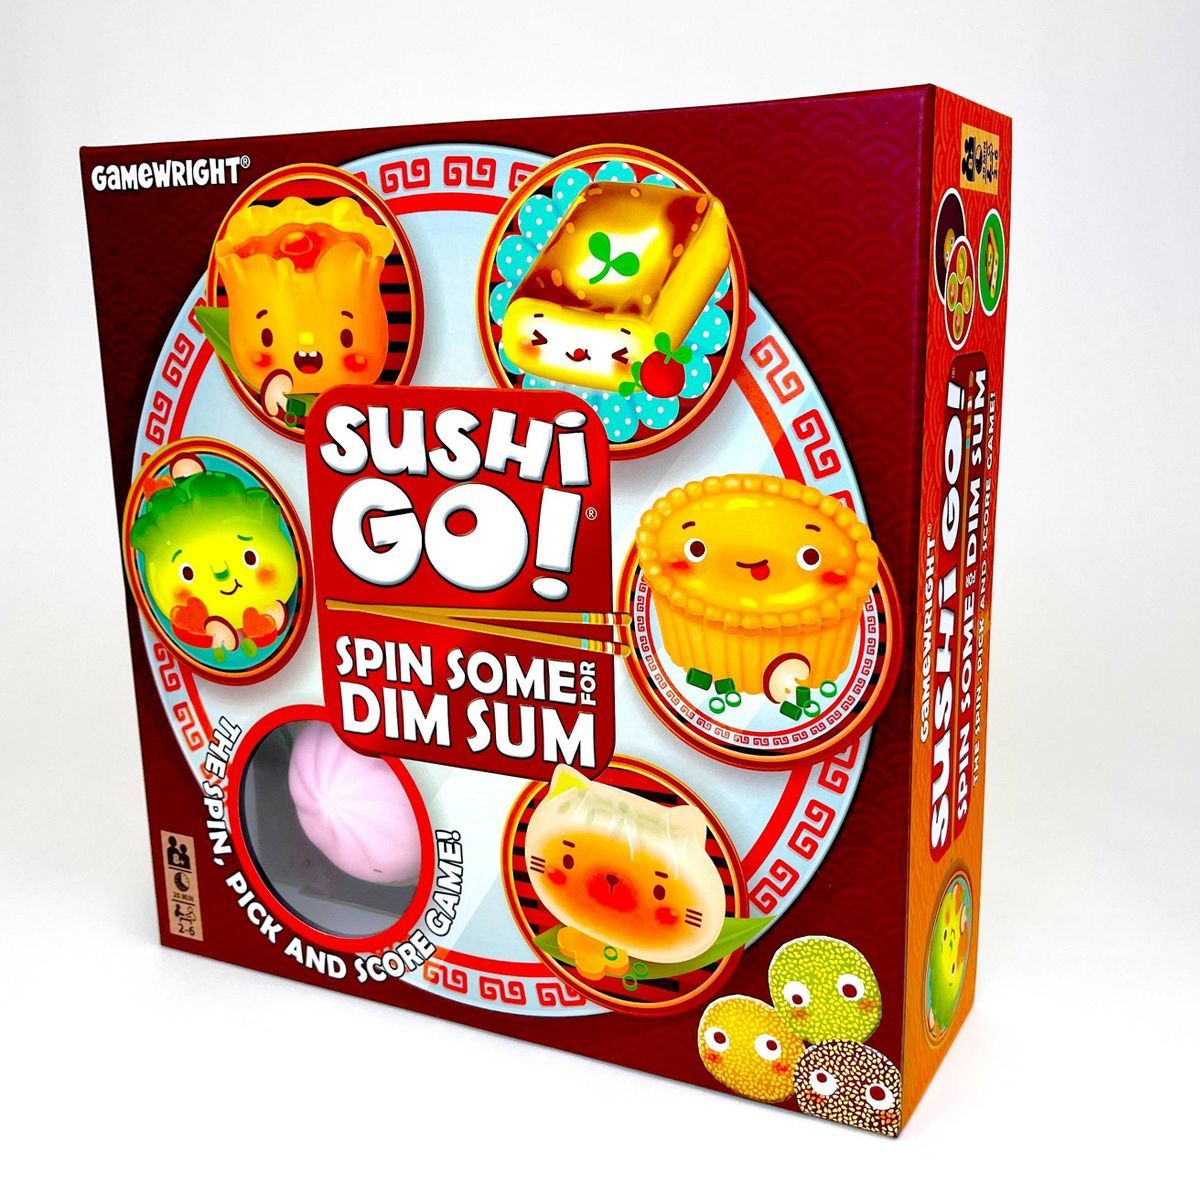 Gamewright Sushi Go Spin Some for Dim Sum Board Game | Target